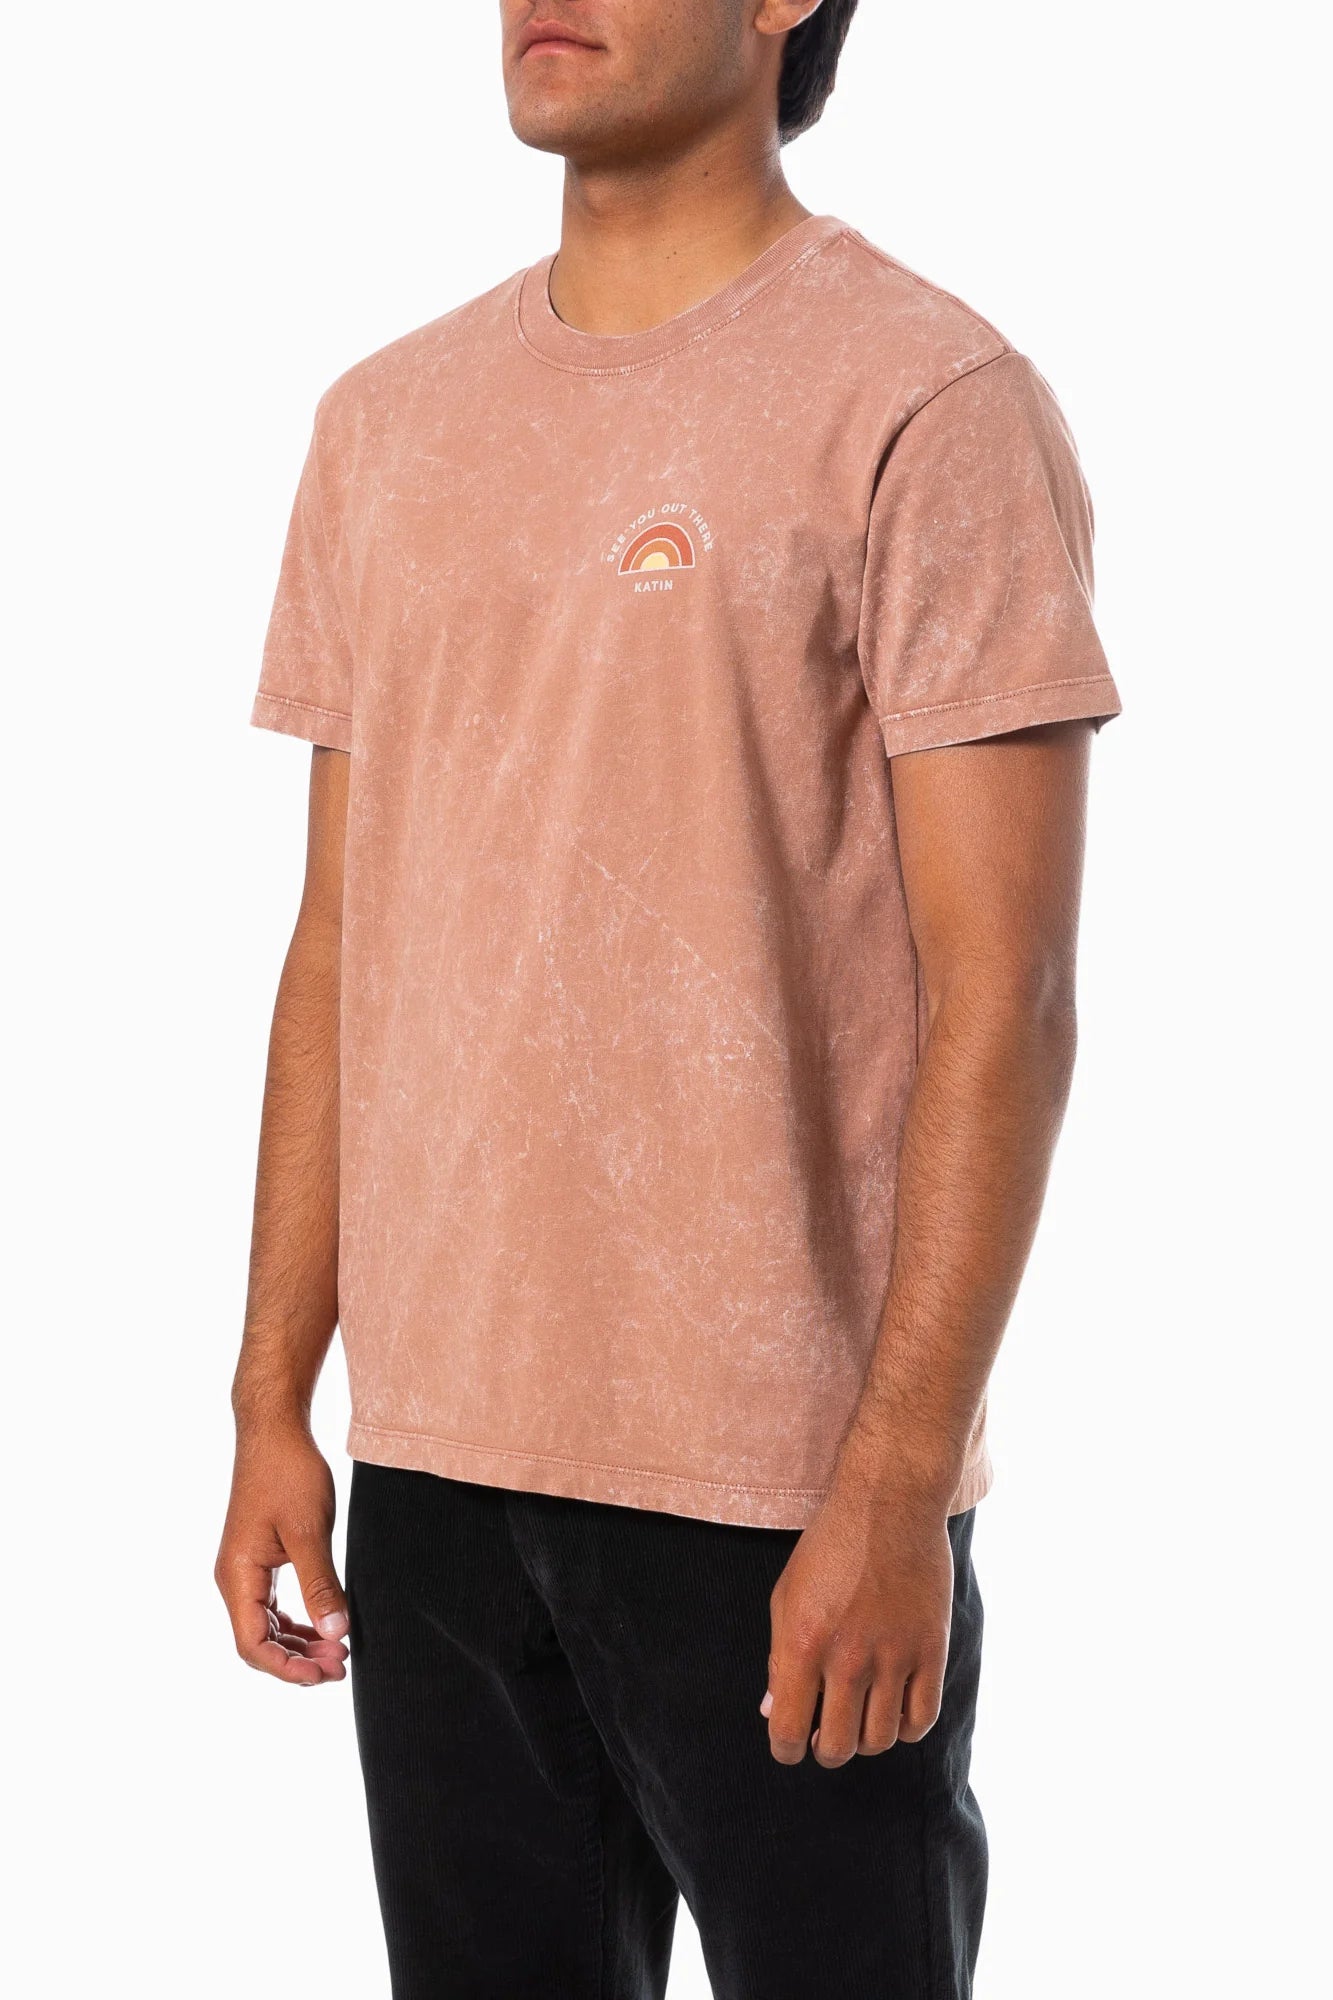 Voyage Tee - Red Fade Sand Wash